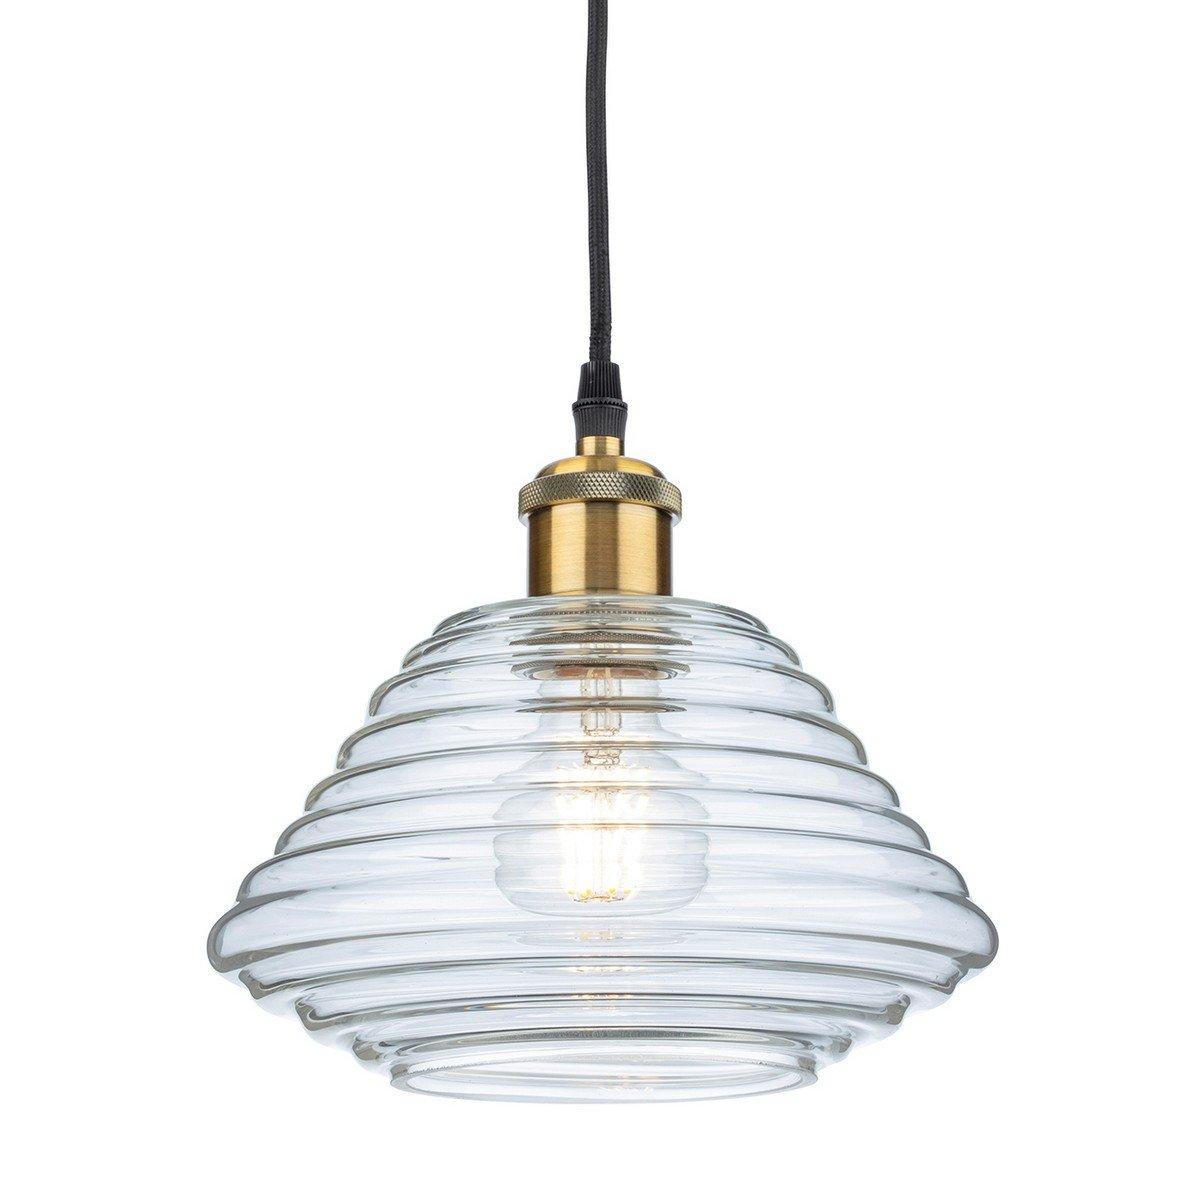 Logan Dome Pendant Light Antique Brass with Clear Glass